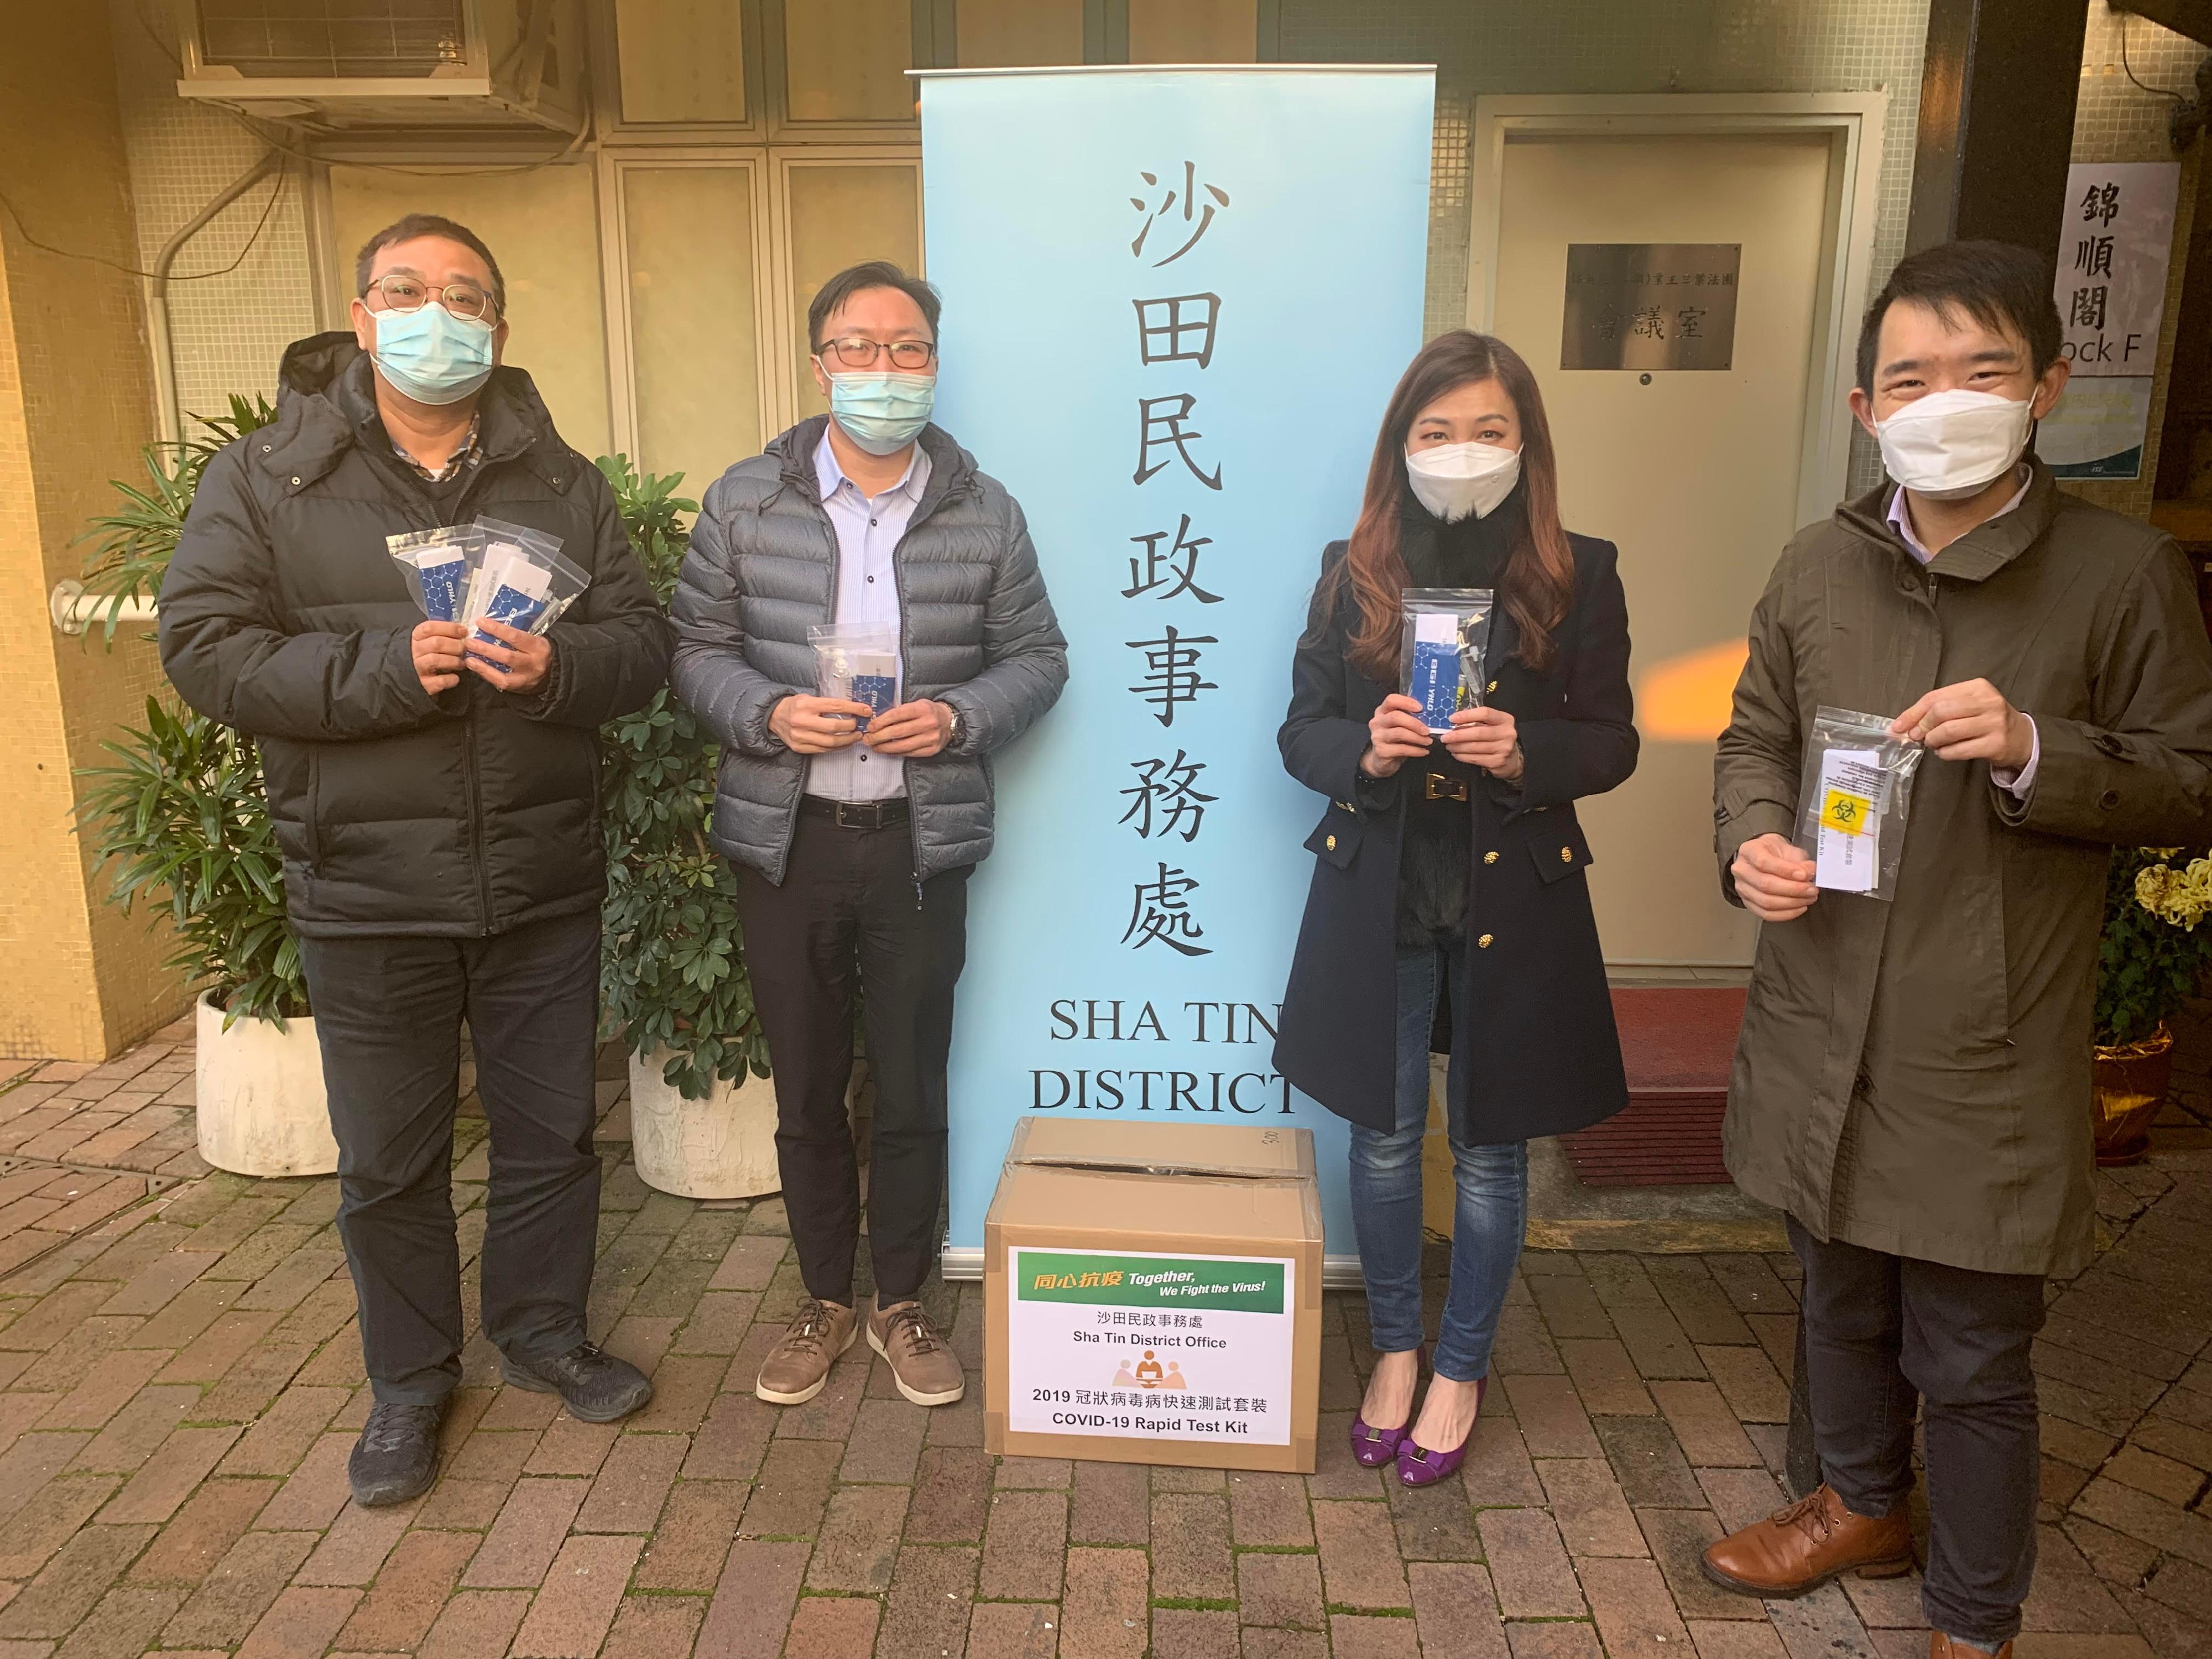 The Sha Tin District Office today (February 23) today distributed rapid test kits to cleansing workers and property management staff working in Kam Ying Court and Shek Mun Estate for voluntary testing through the Housing Department and the property management companies.